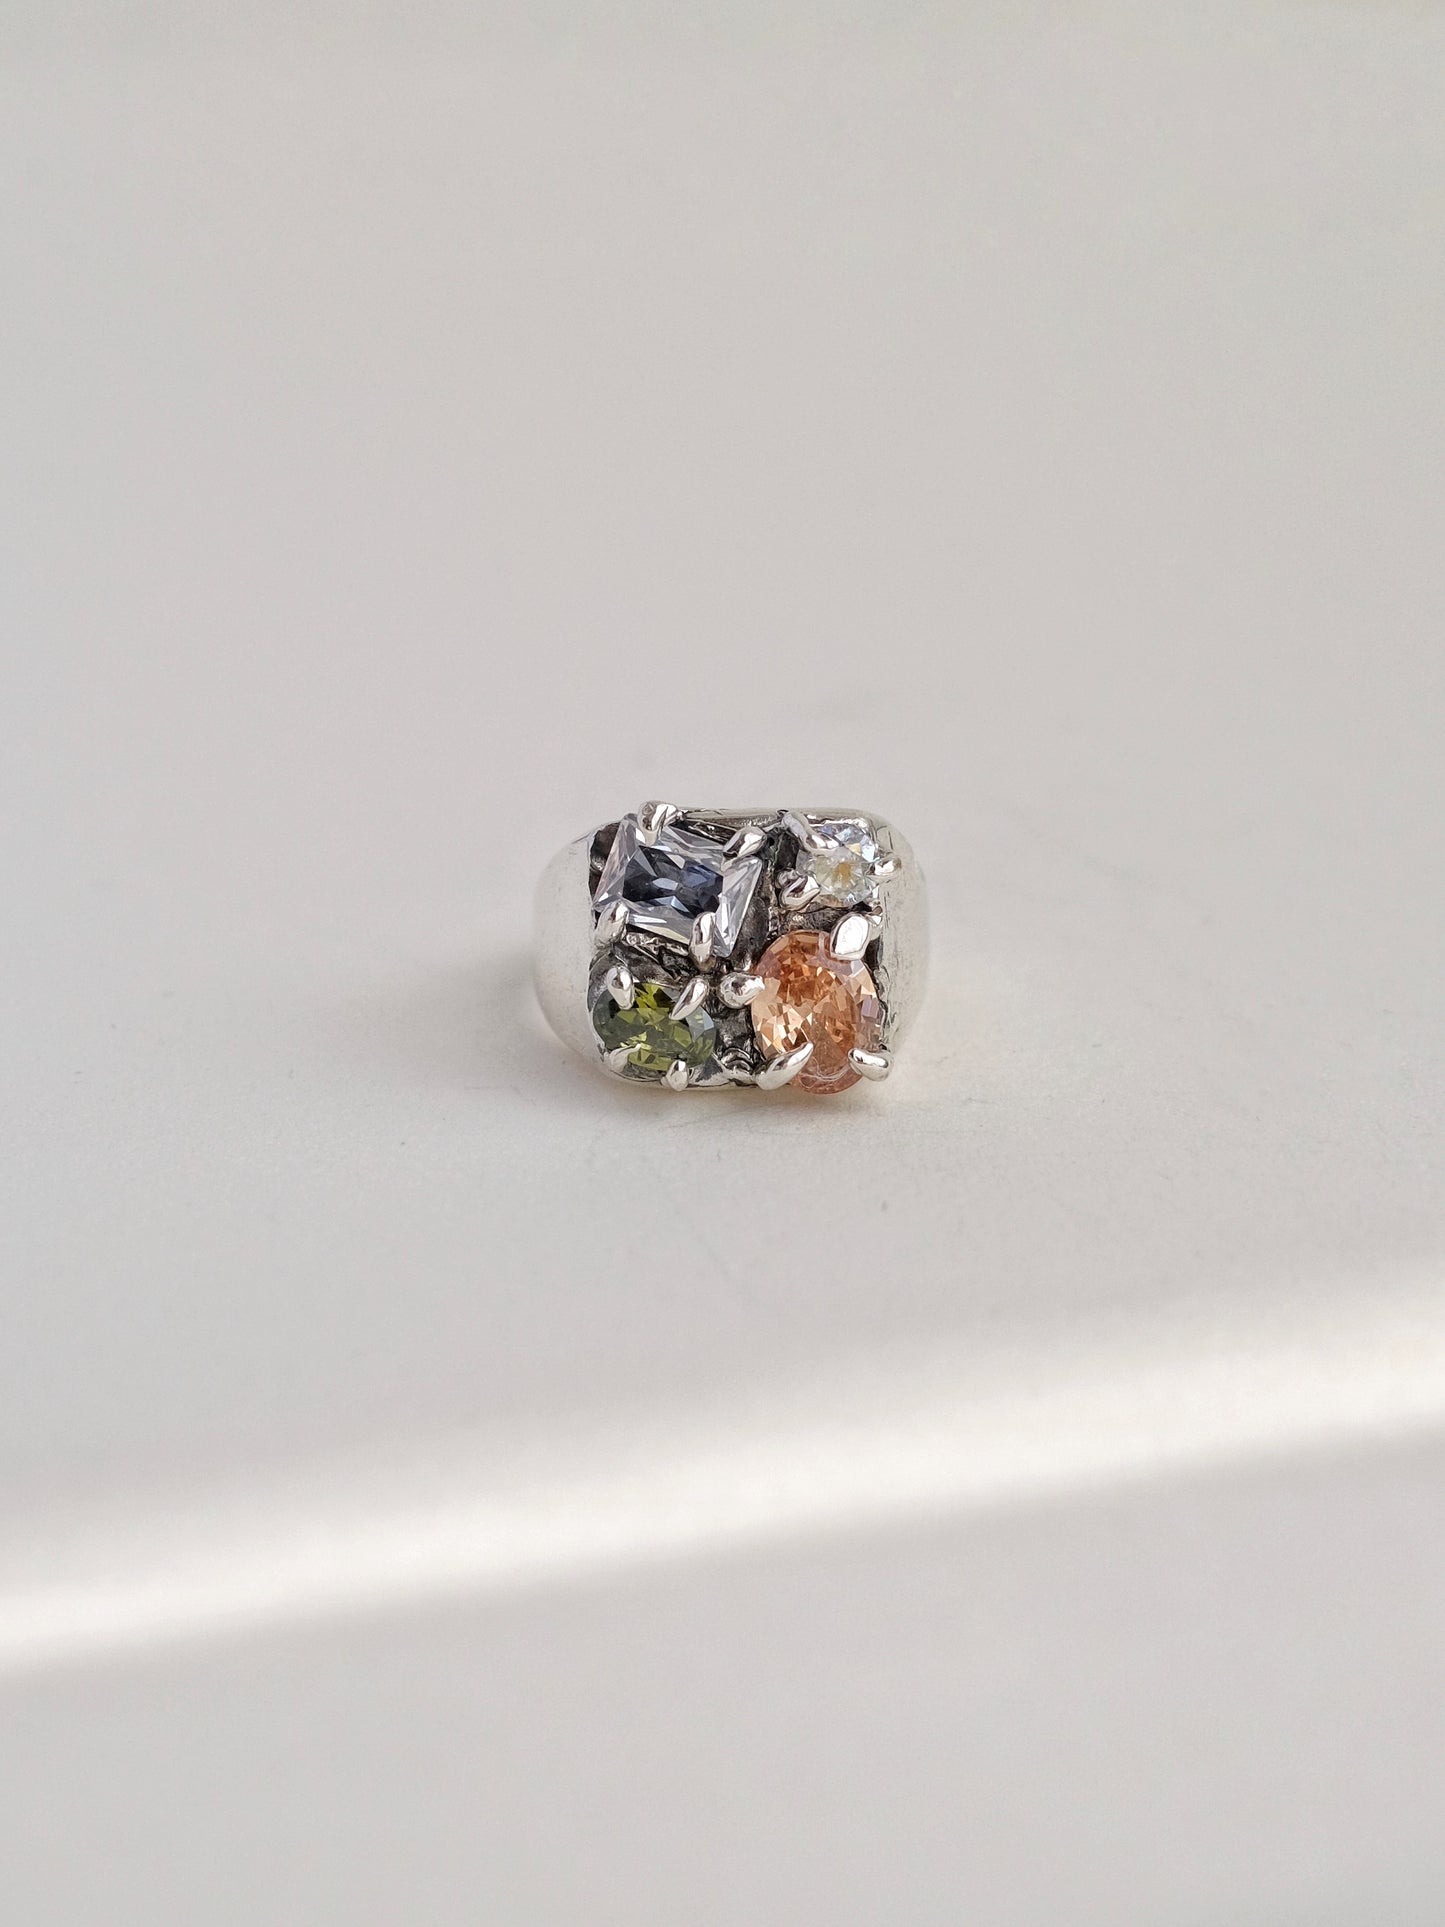 Ring "Cheerful square"